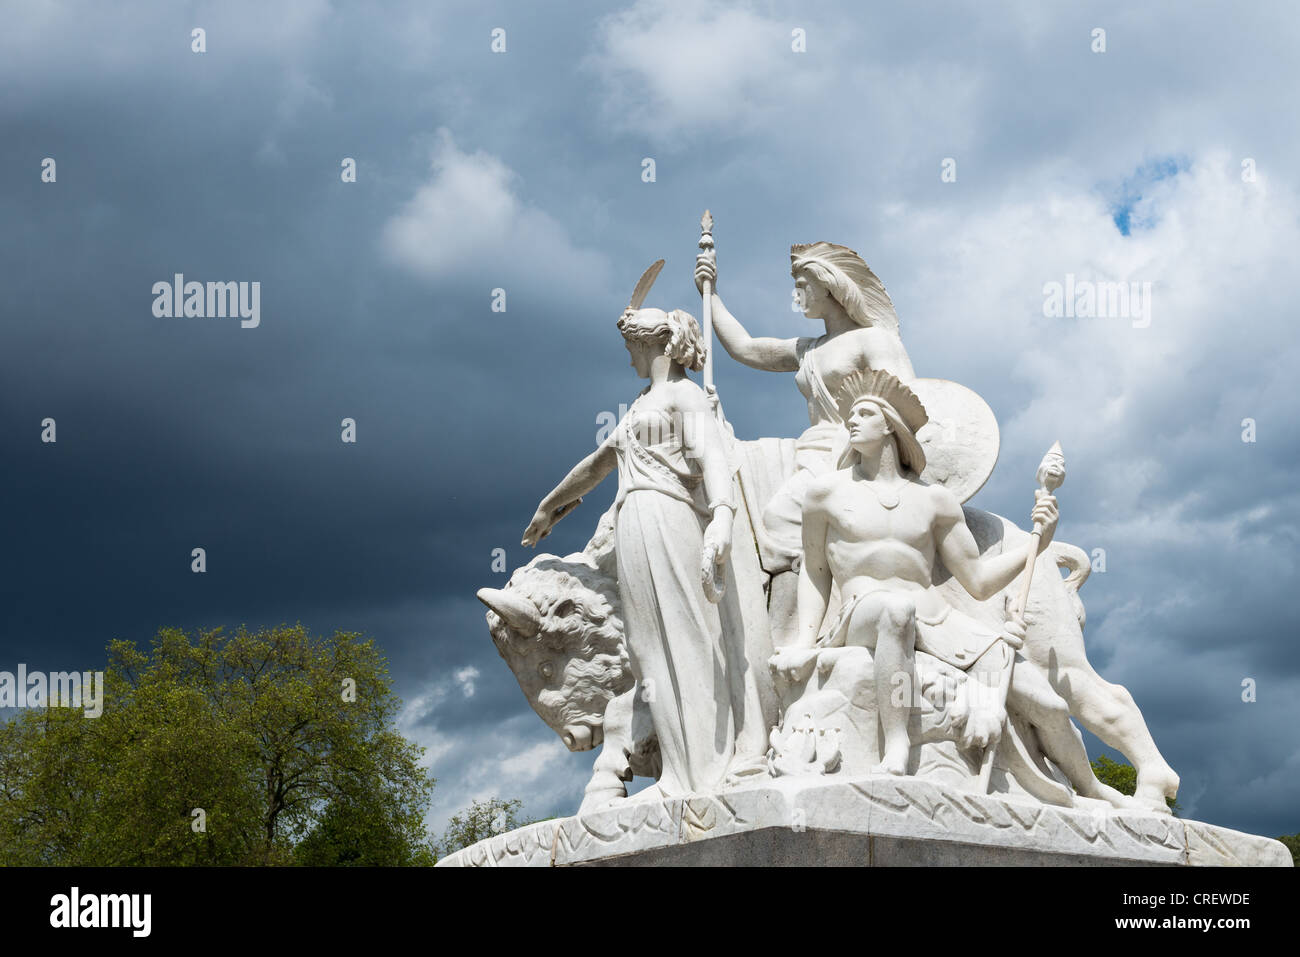 America group of sculptures against a stormy sky at Albert Memorial, London, England. Stock Photo